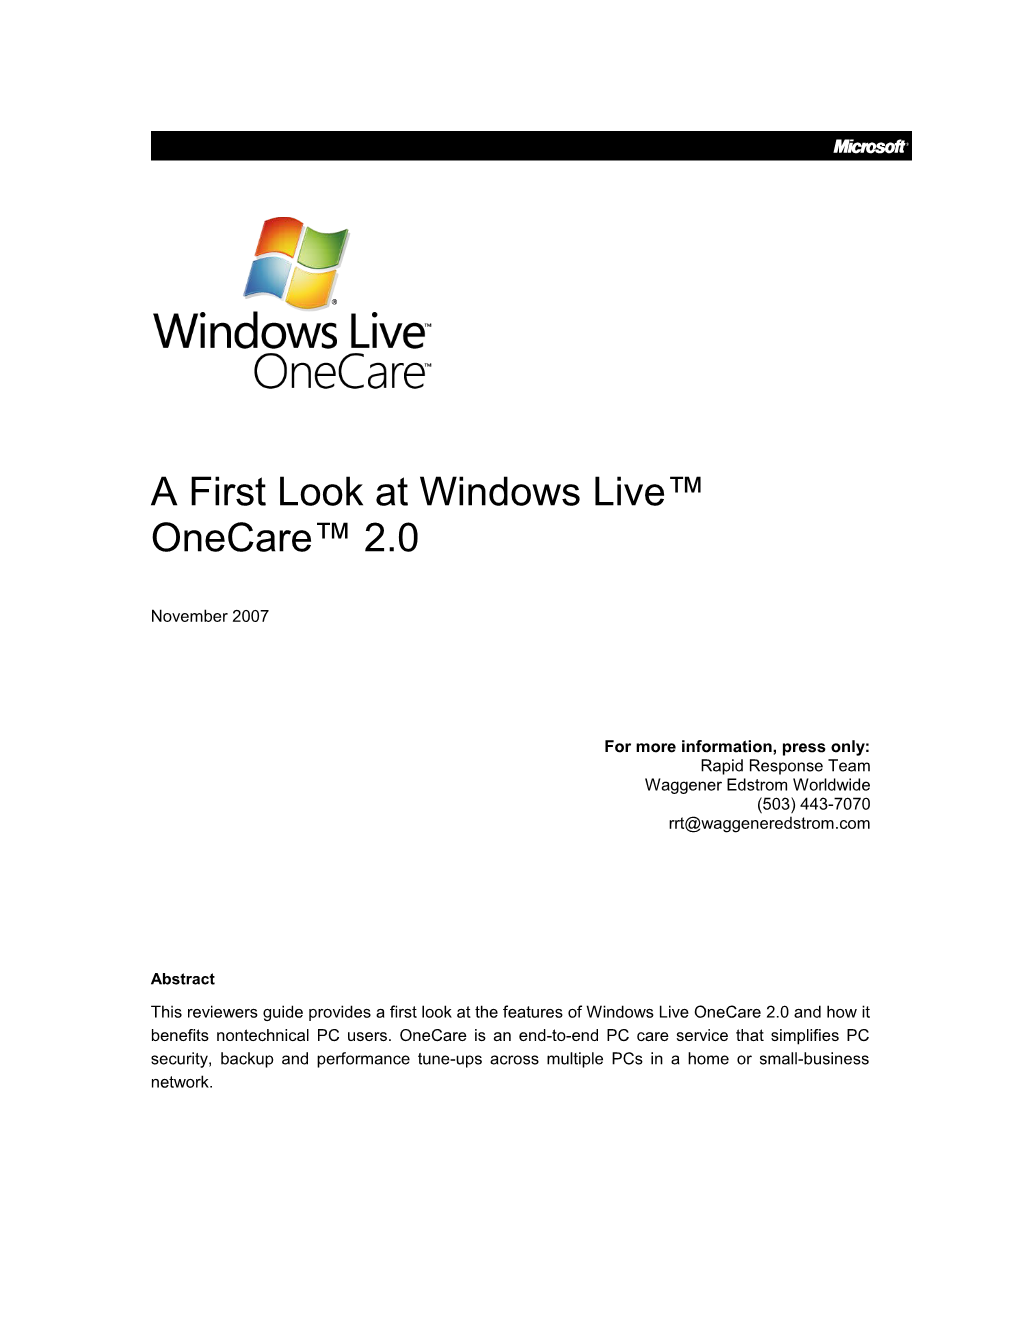 Windows Live Onecare 2.0 First Look